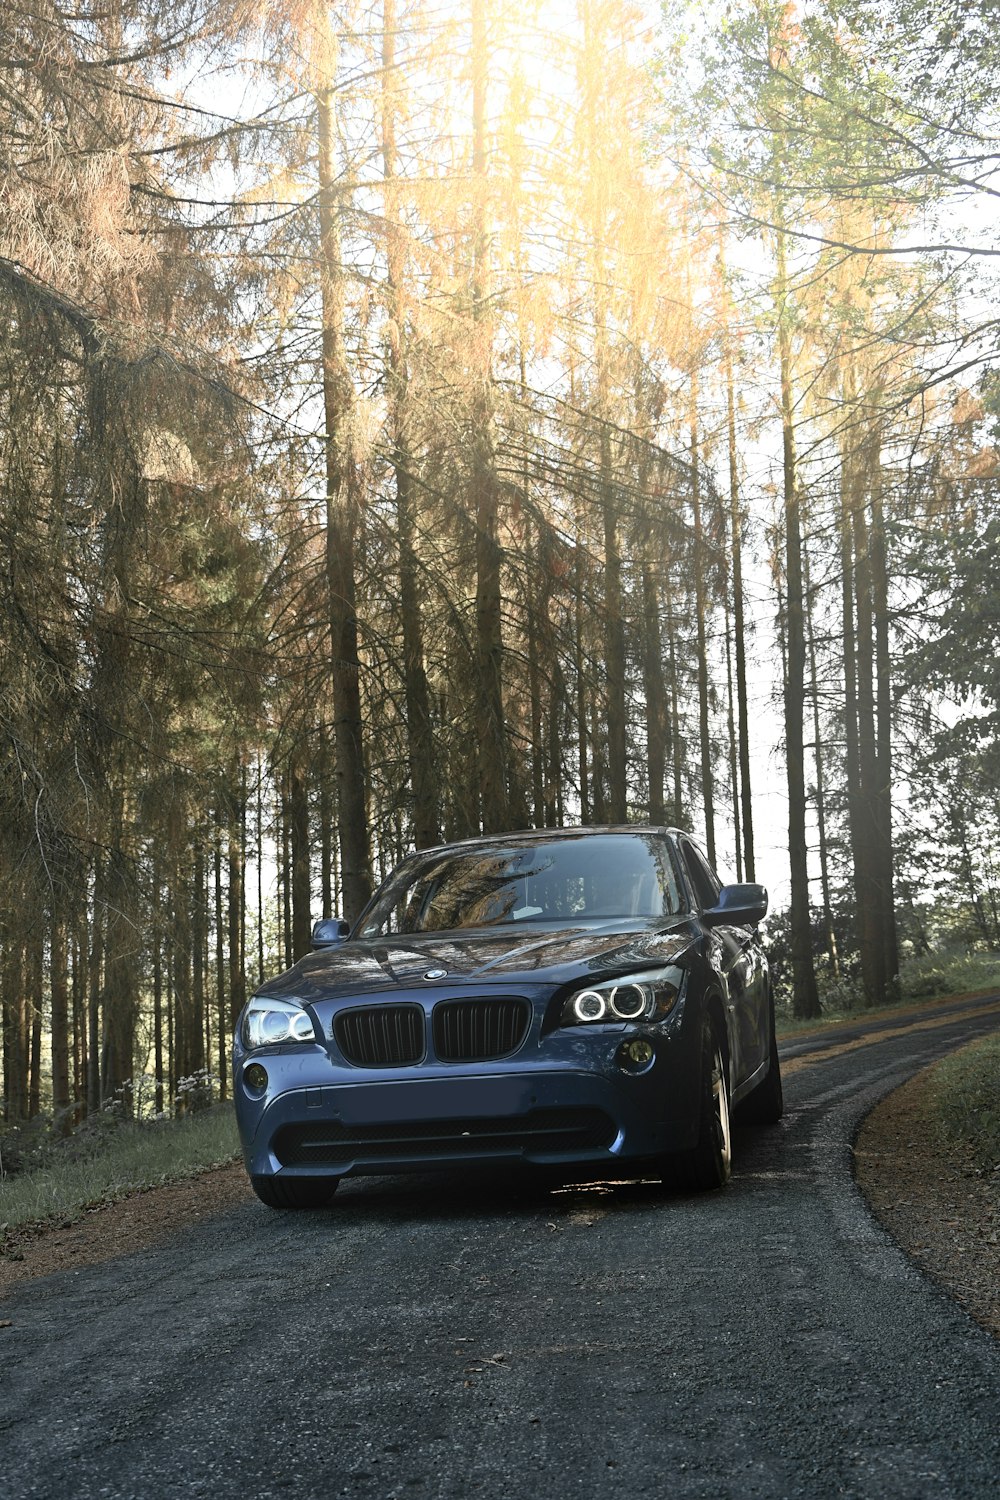 blue bmw m 3 on road in between trees during daytime